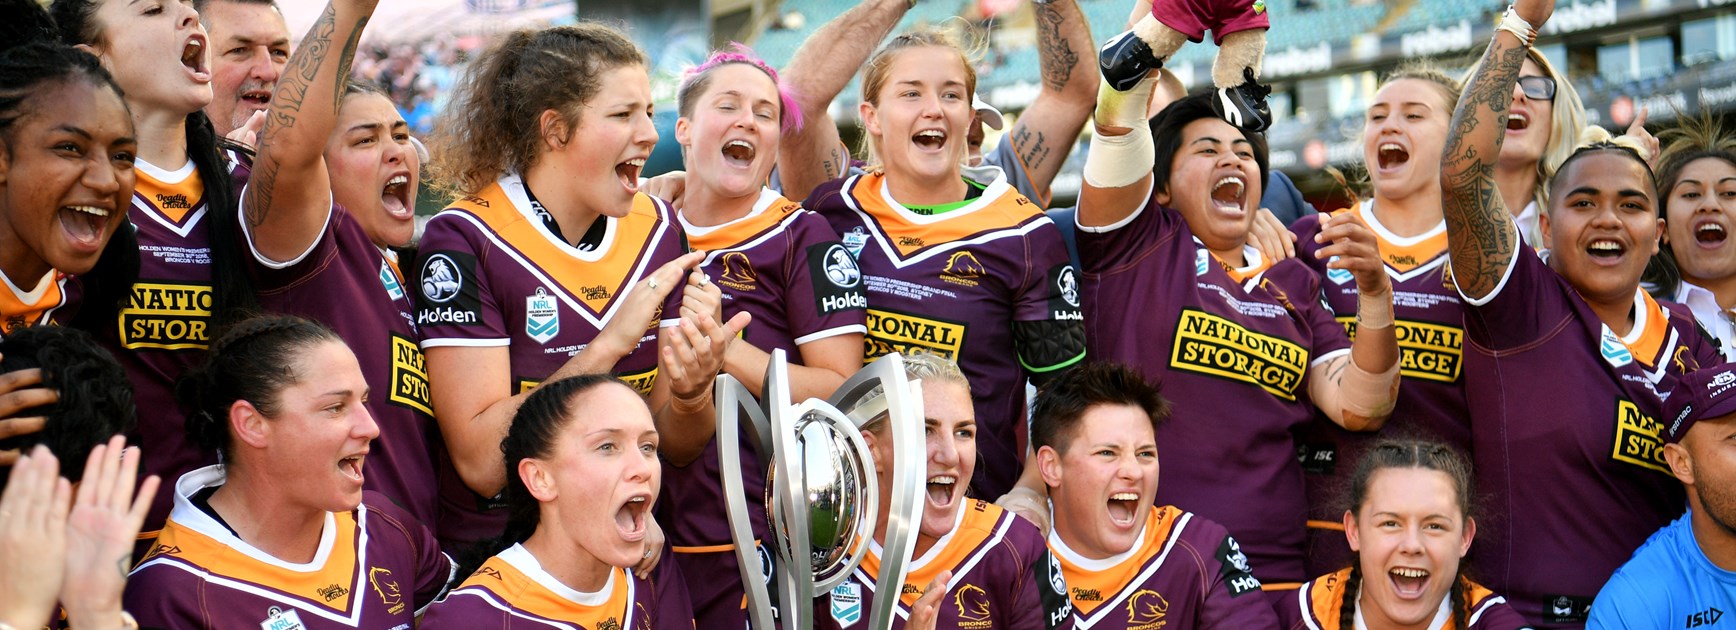 The Broncos celebrate winning the inaugural NRLW competition.